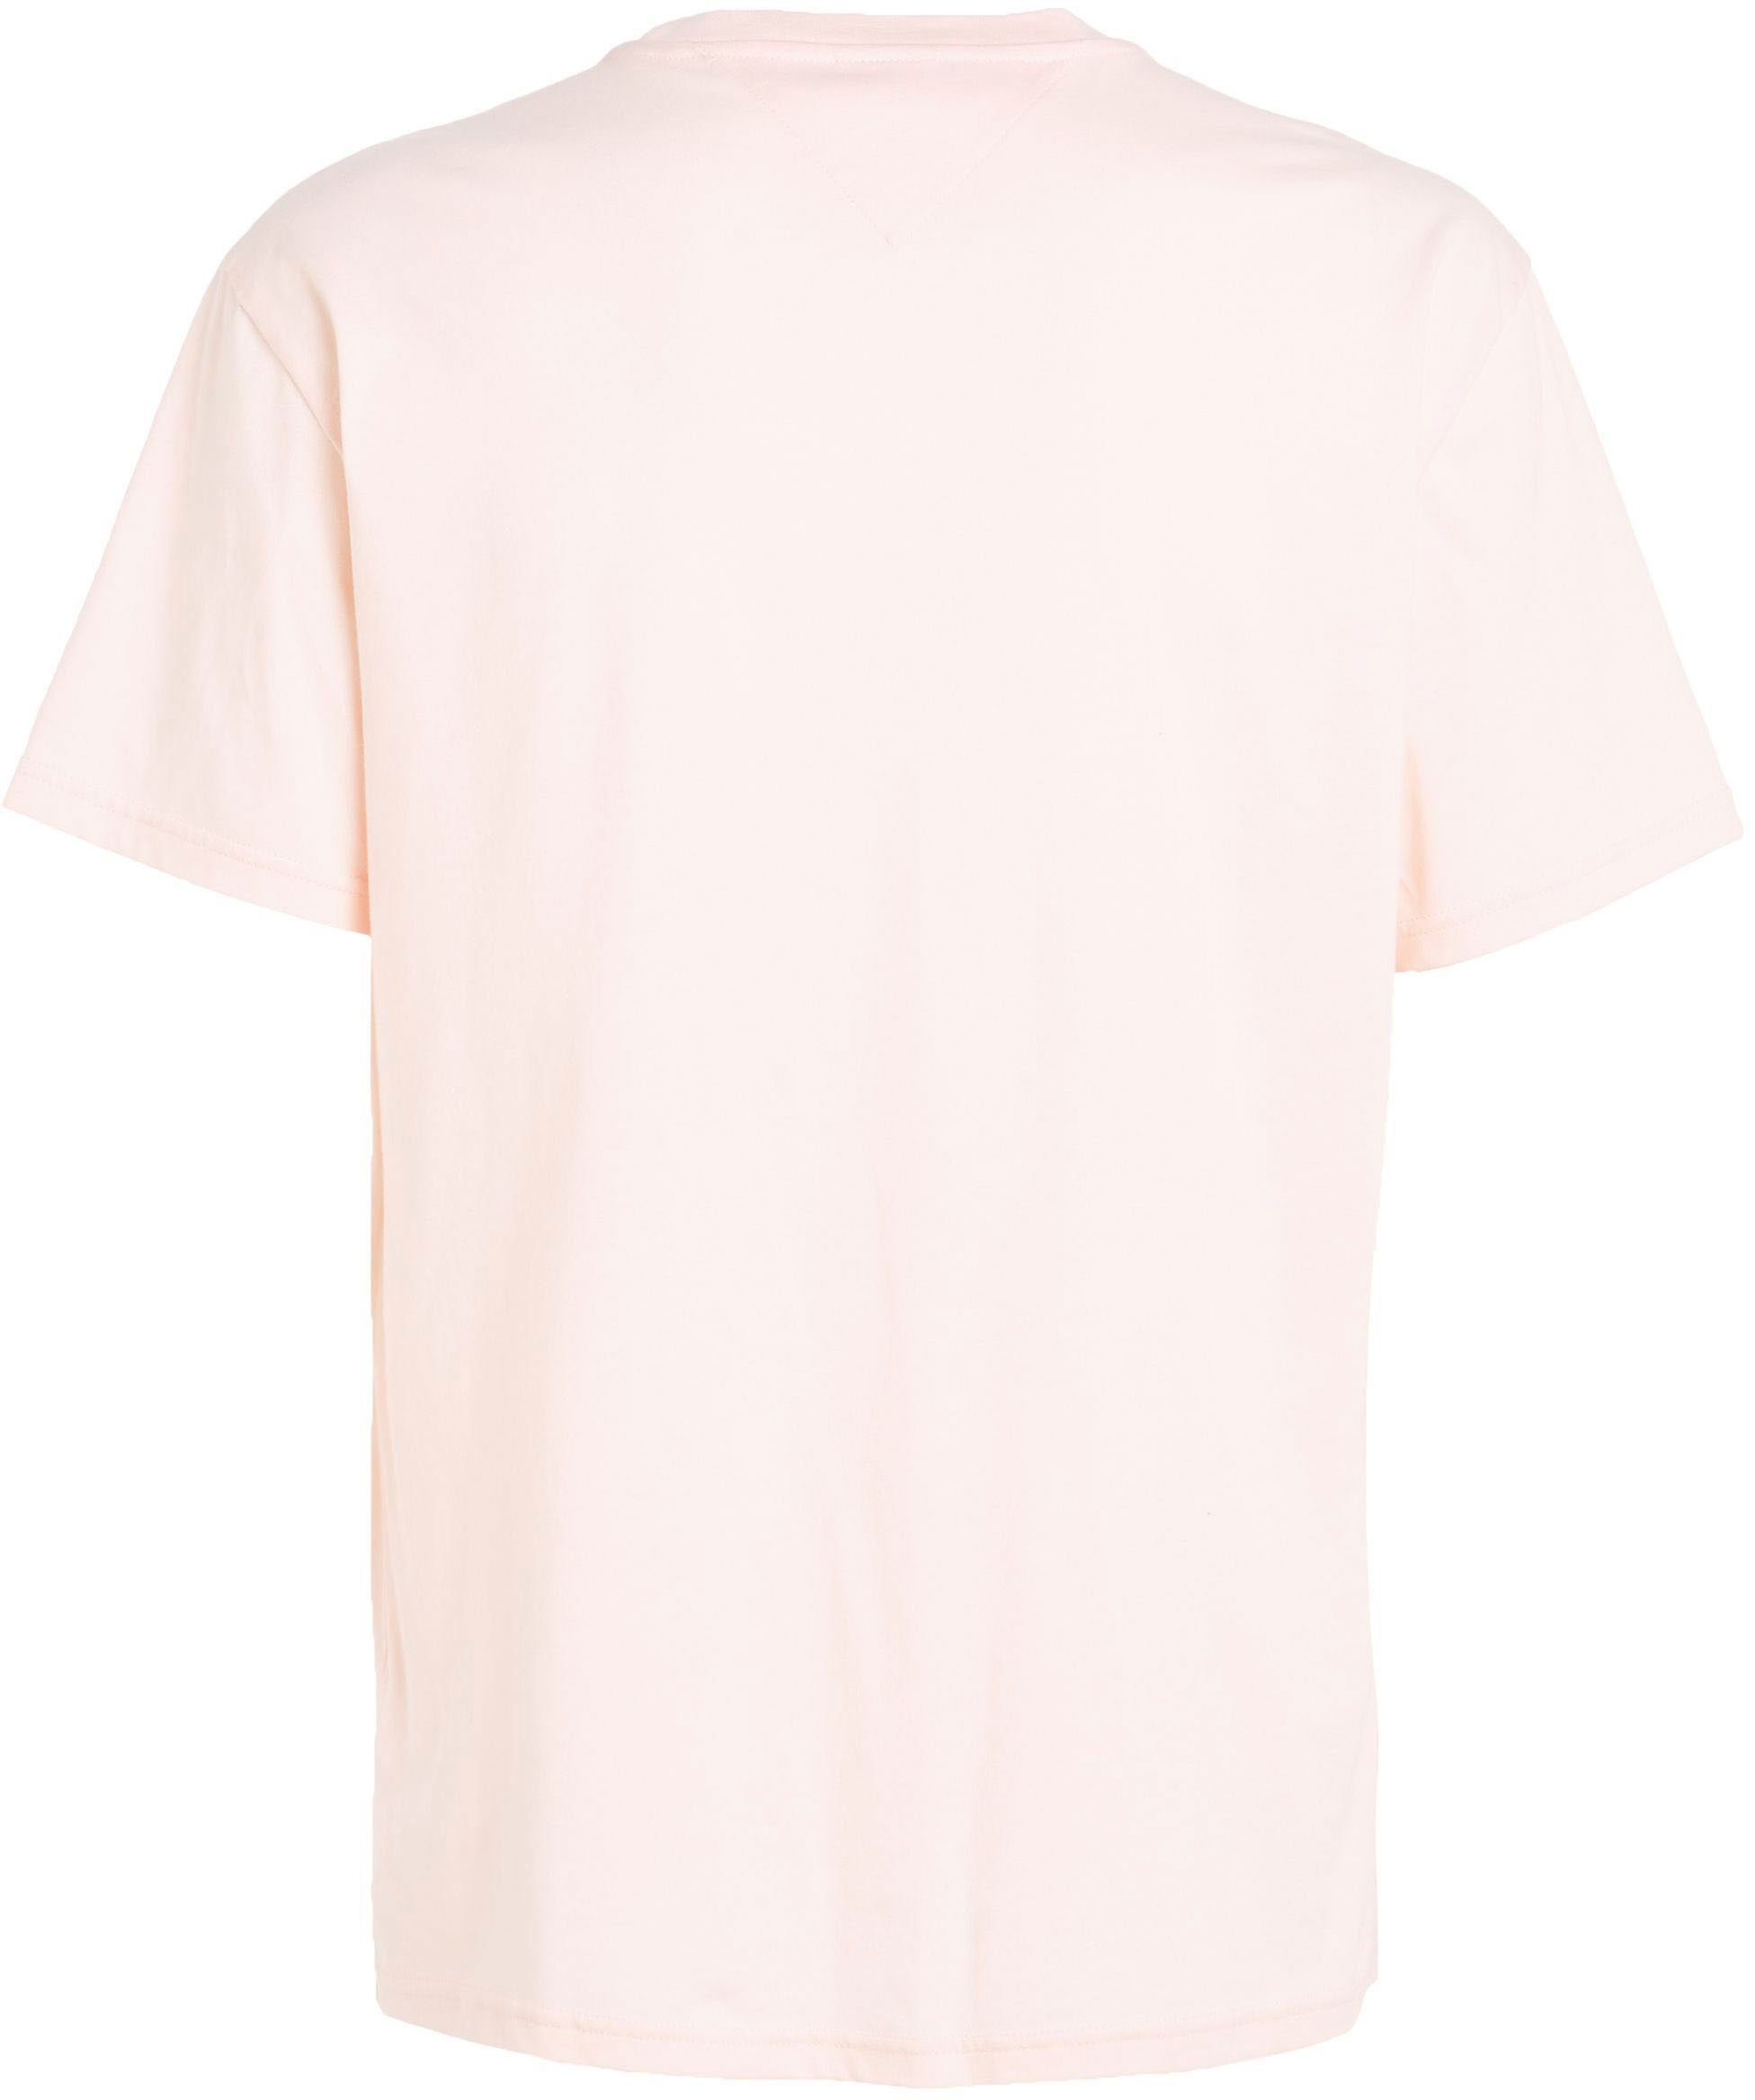 TJM T-Shirt CLSC TEXT Faint Pink Jeans SMALL TEE Tommy